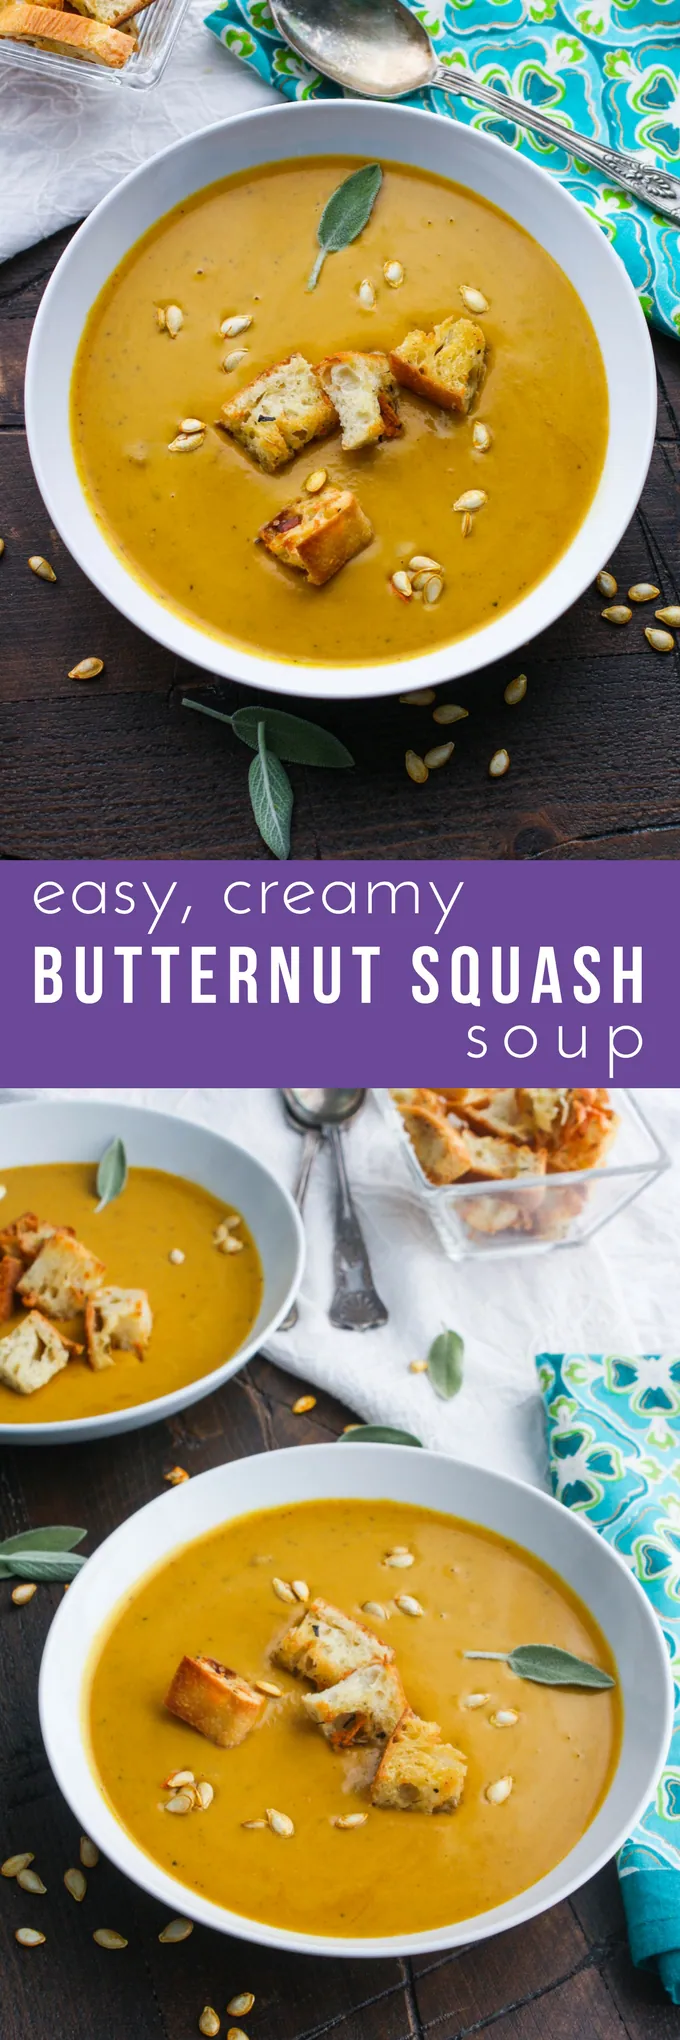 Easy, Creamy Butternut Squash Soup is a lovely soup for the season. You'll love the colors and flavors of this soup!